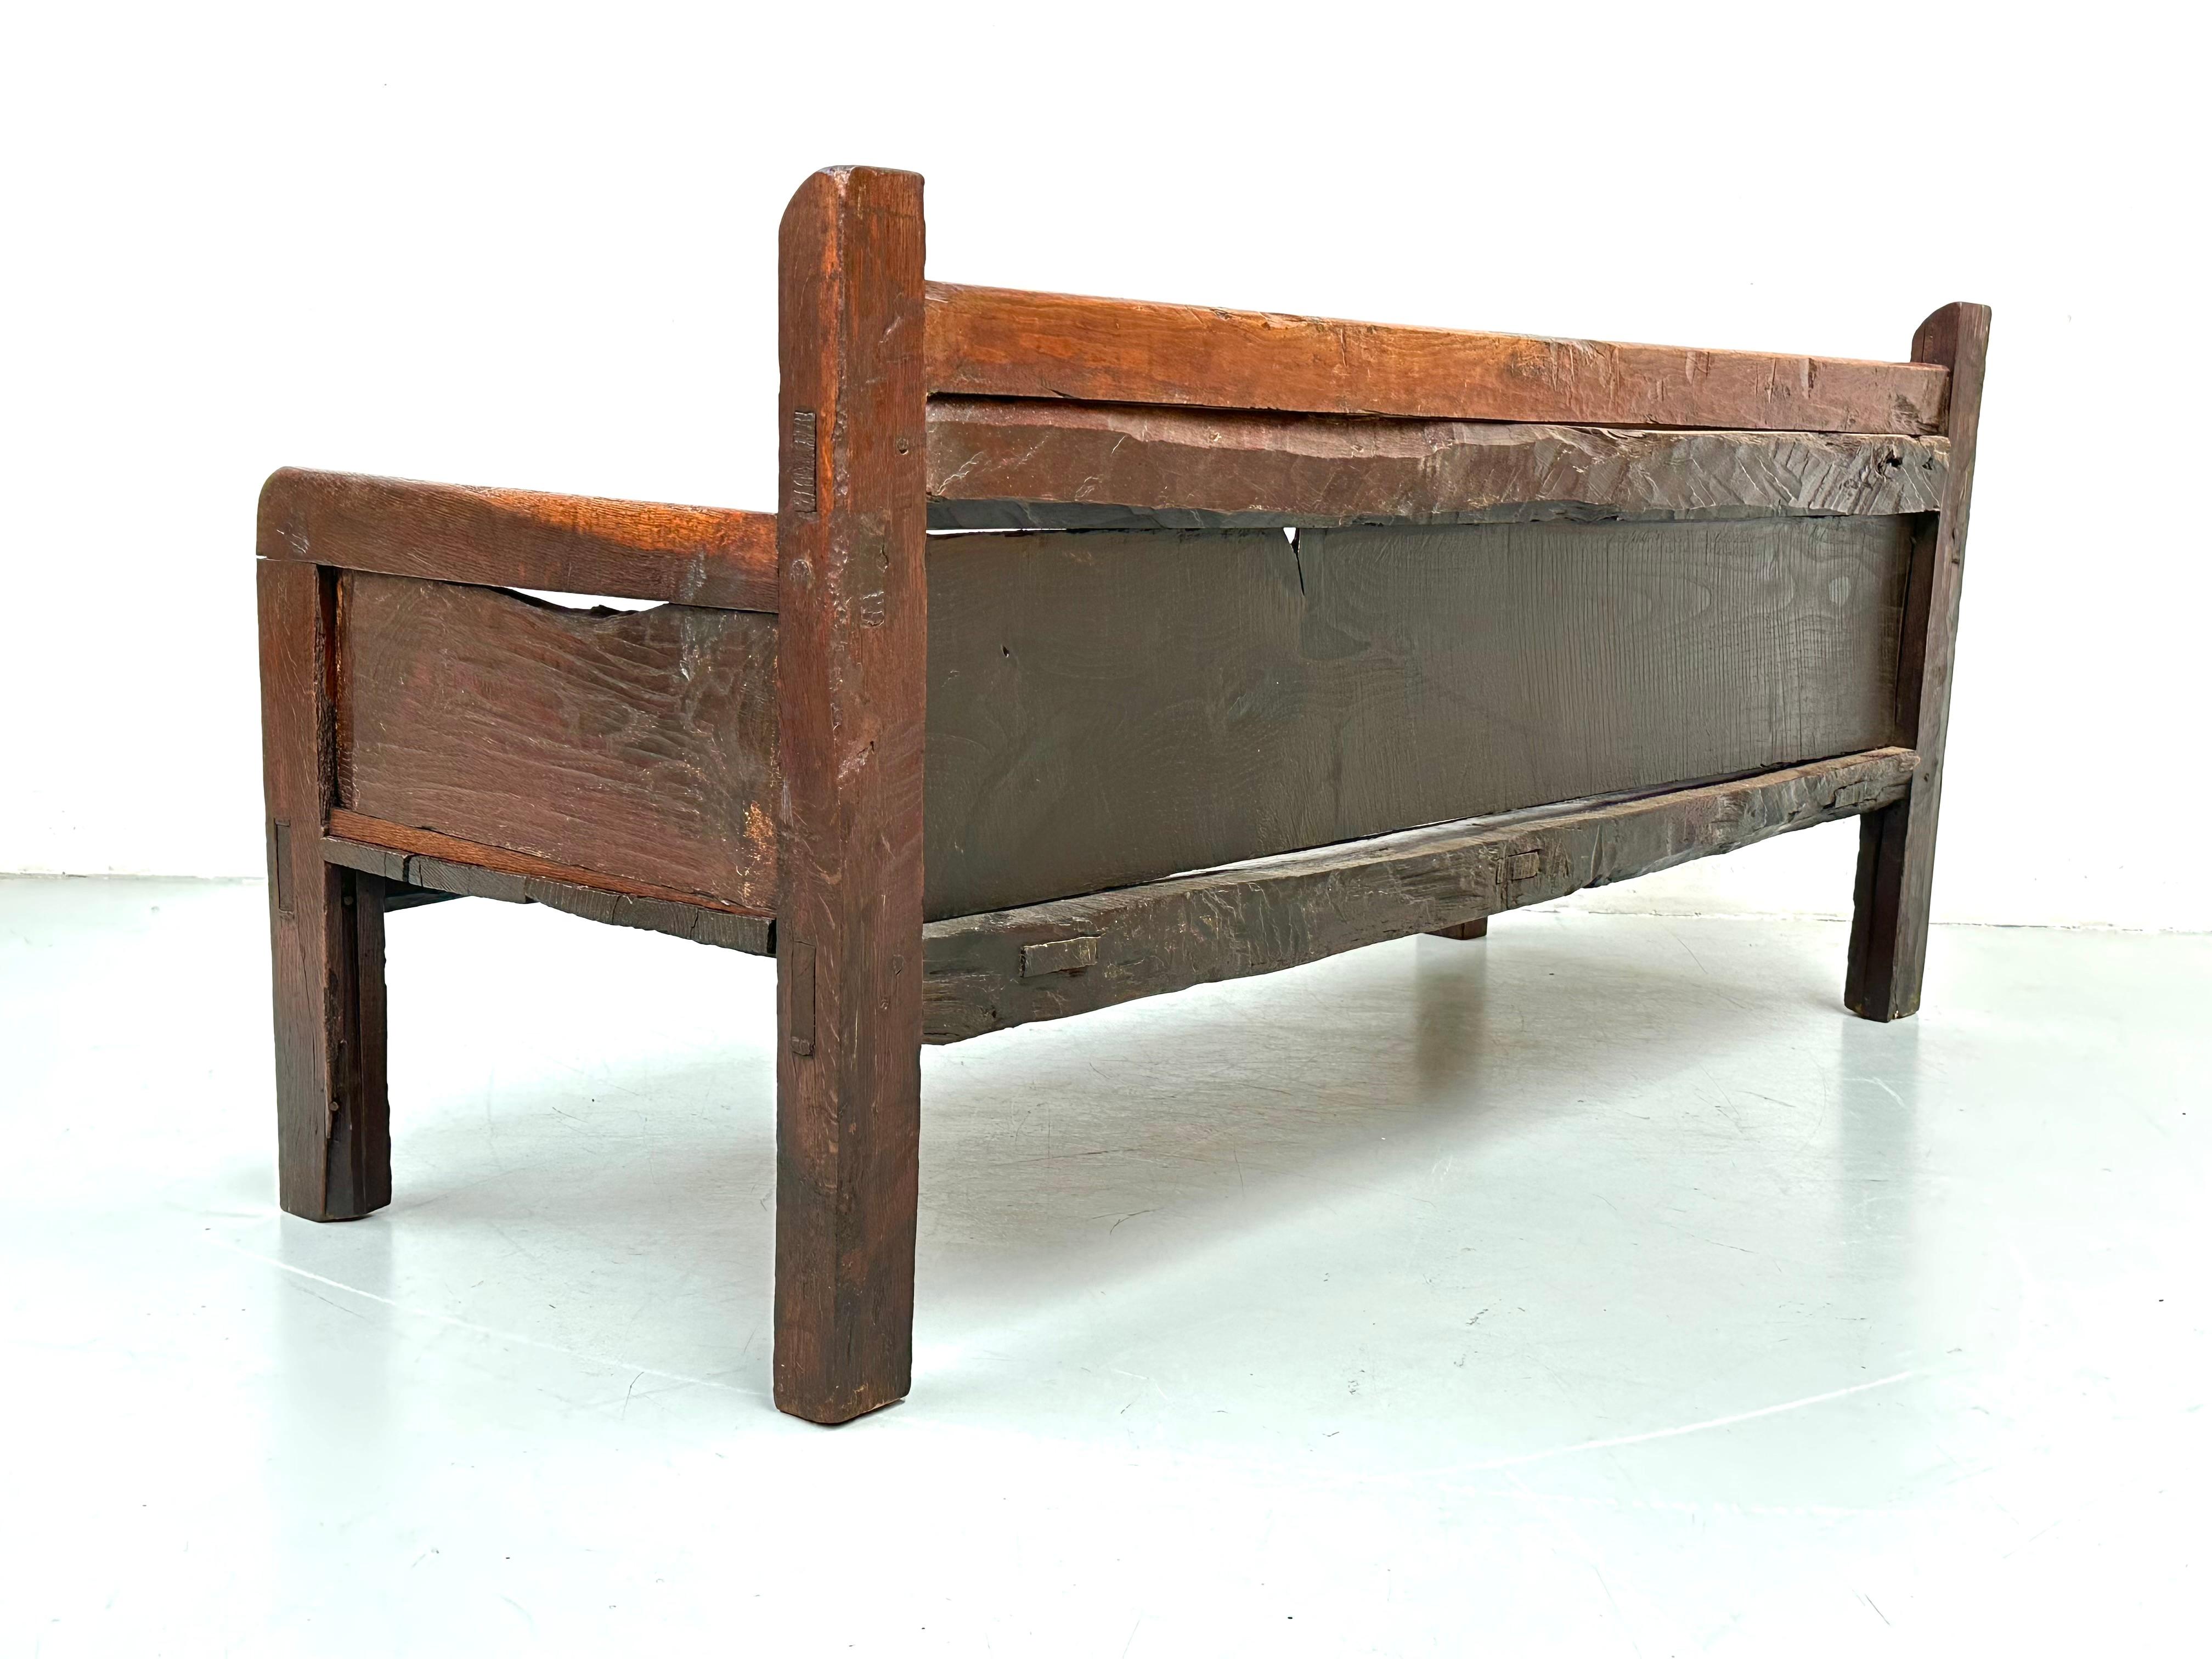 Antique Handmade Minimalistic Spanish Chestnut Wood Bench, Early 19th Century For Sale 12